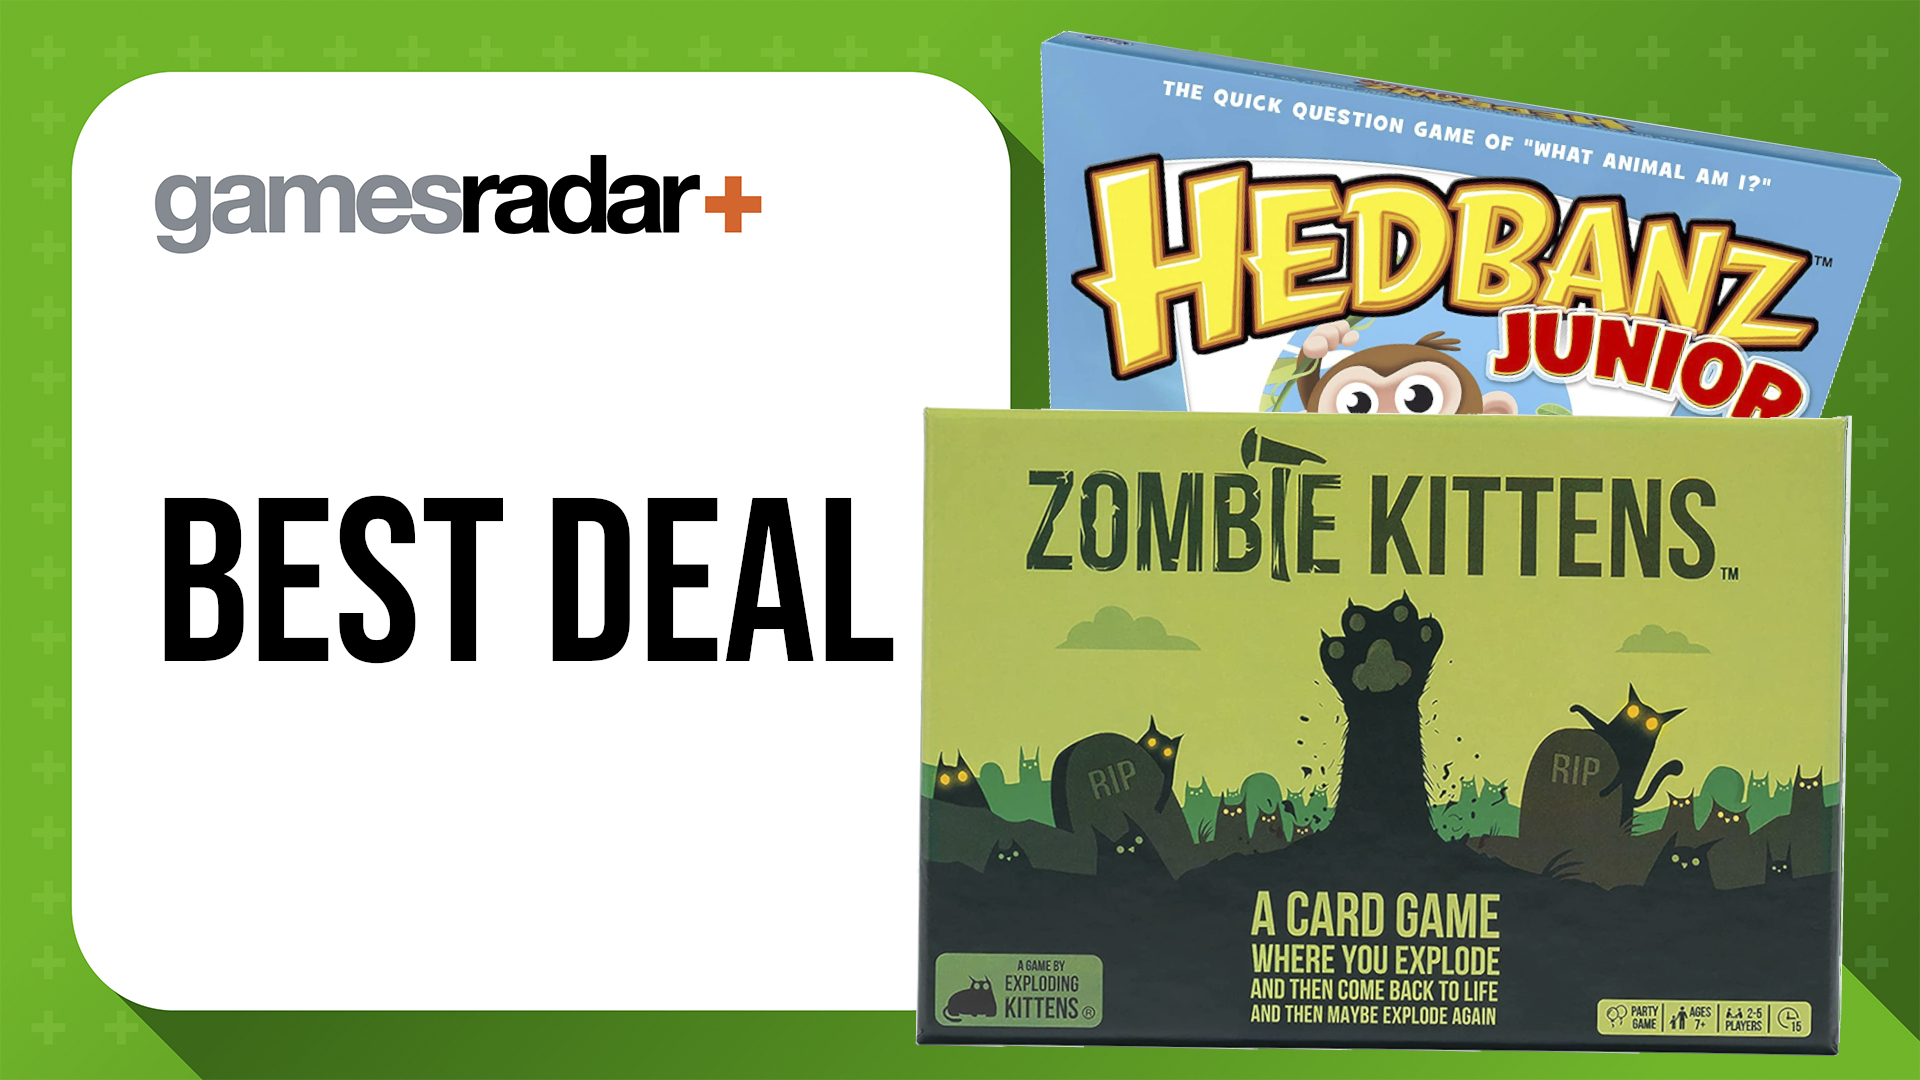 Cyber Monday toy deals with Zombie Kittens and Headbandz Junior